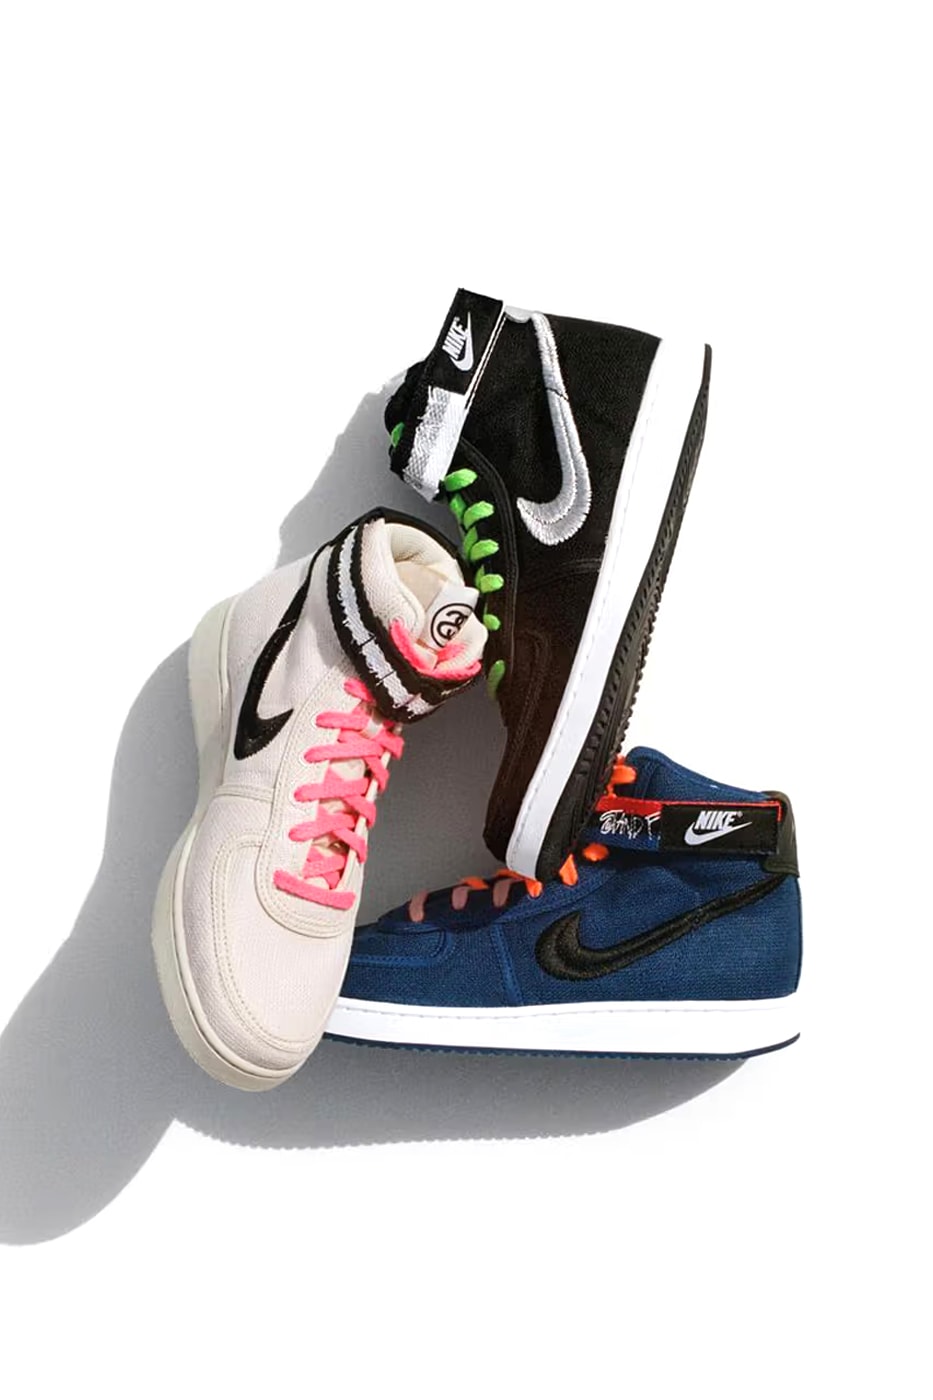 Stüssy Nike Vandal Collection DX5425-400 Release Date info store list buying guide photos price